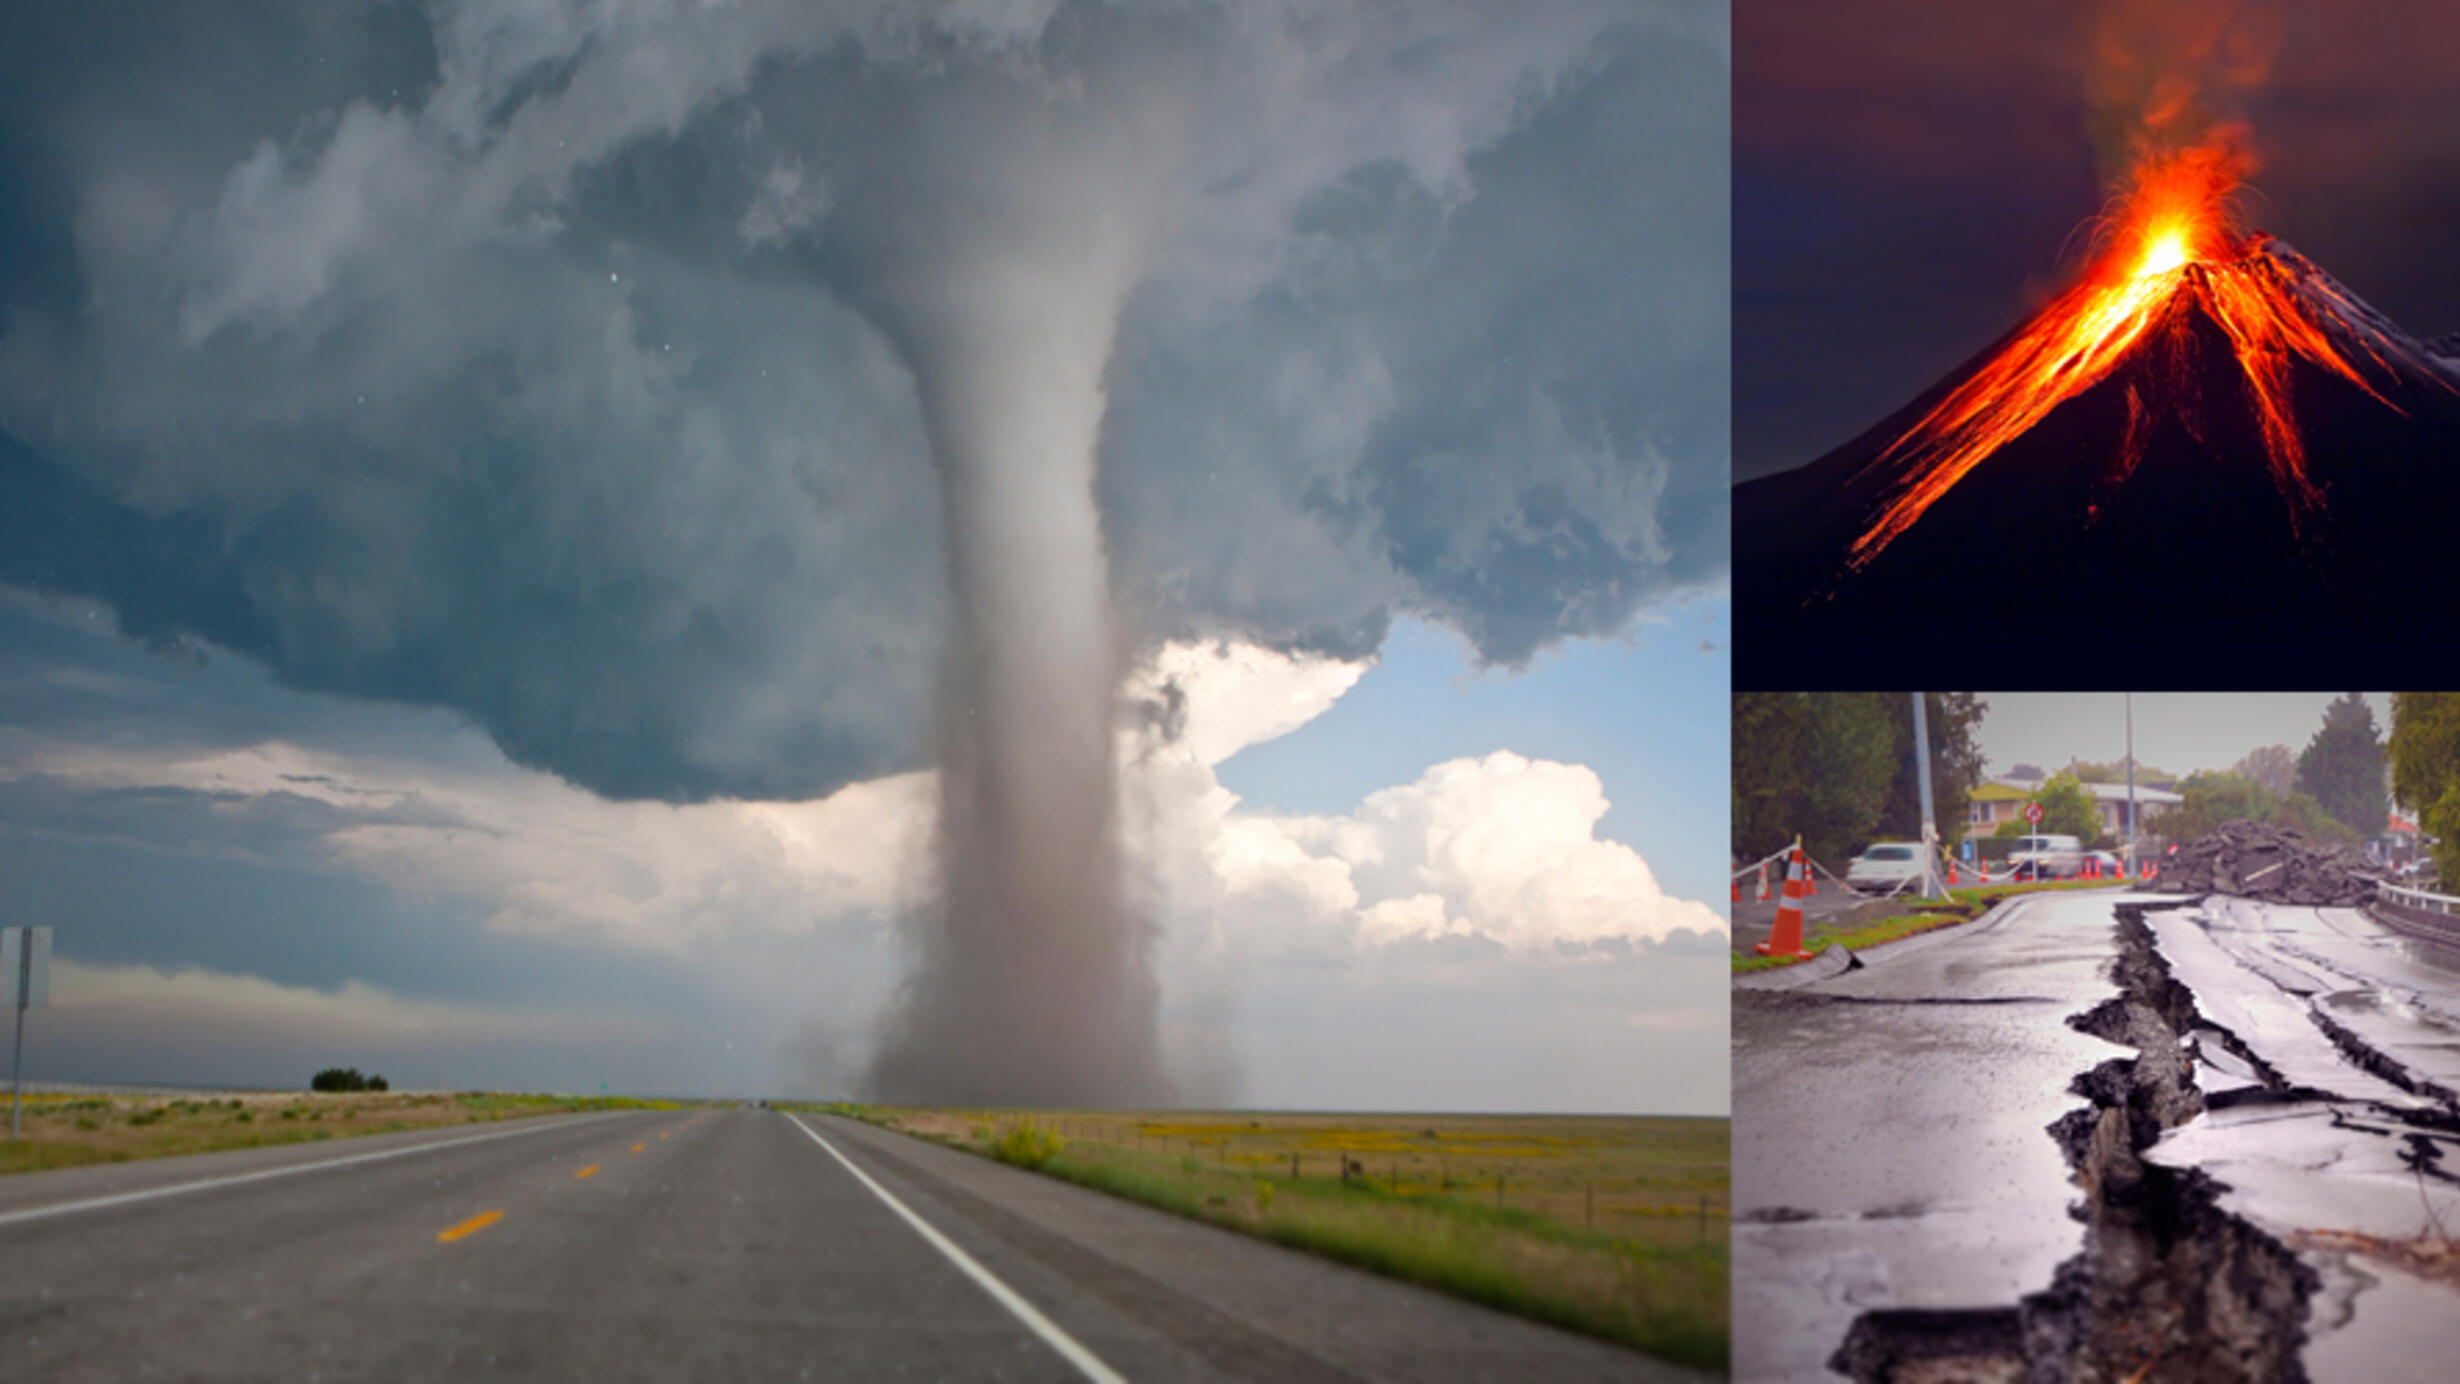 Composite image showing a tornado, an erupting volcano, and a road split by an earthquake.